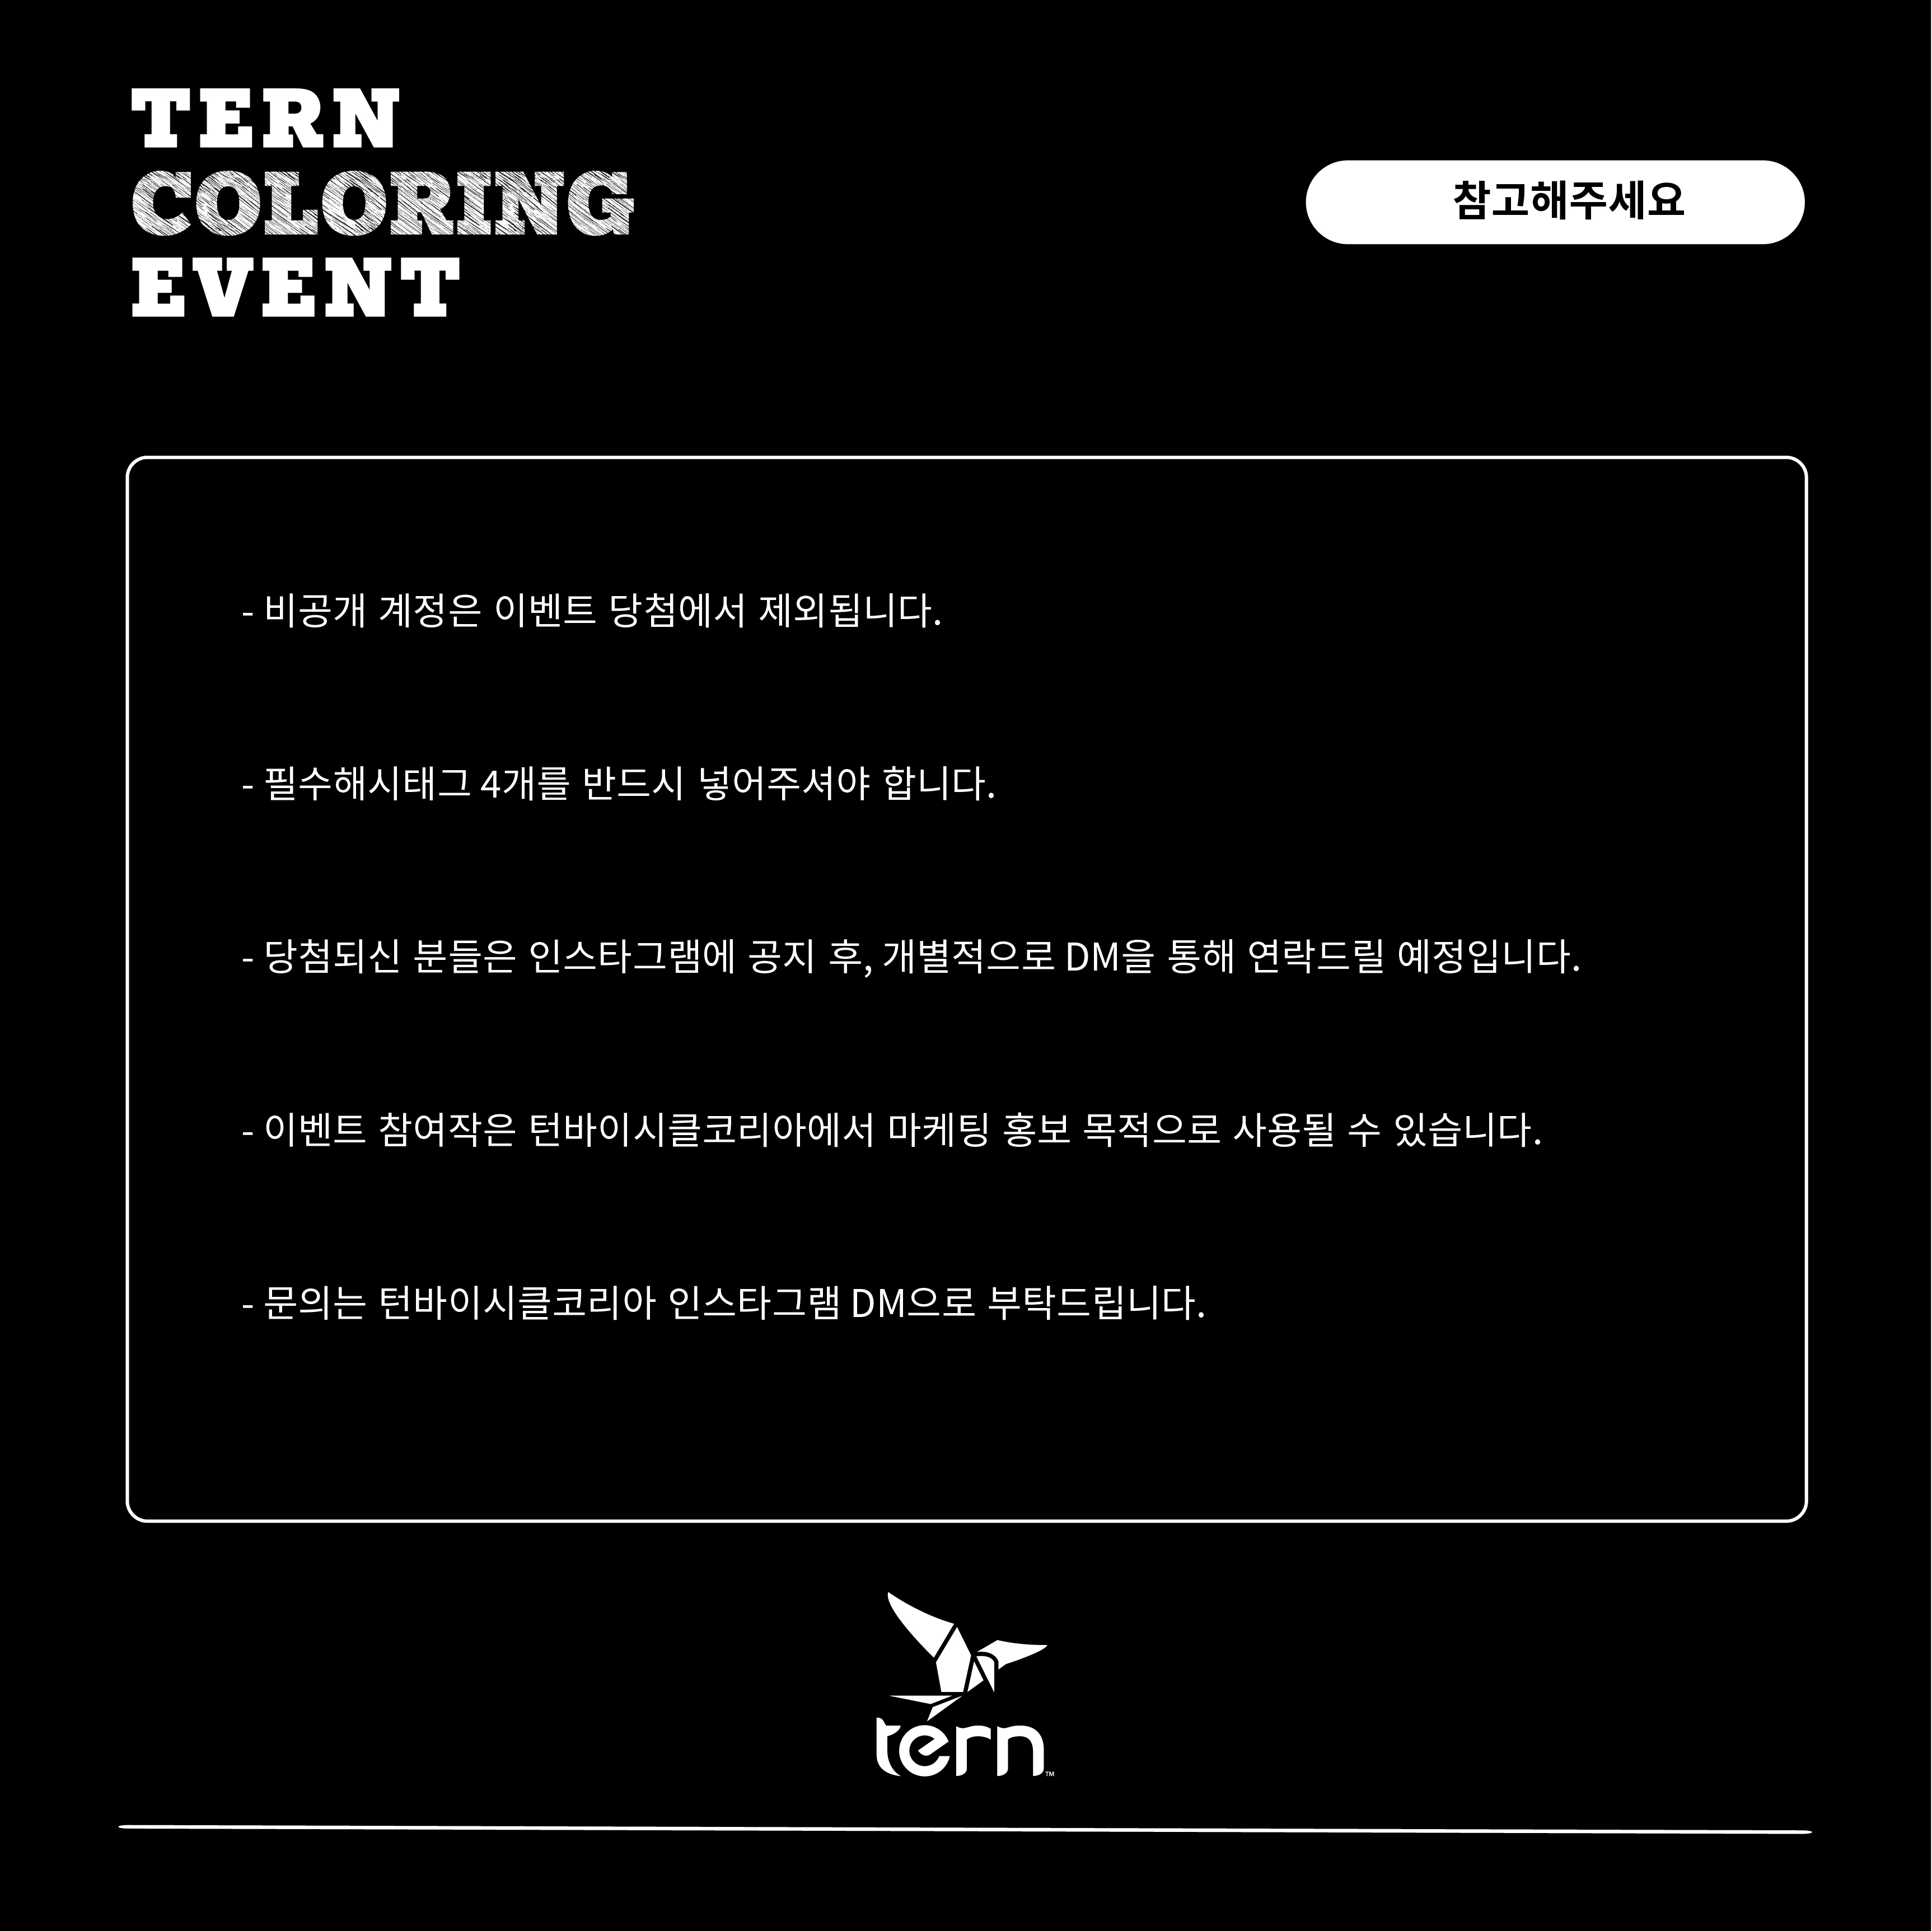 tern_coloring_event